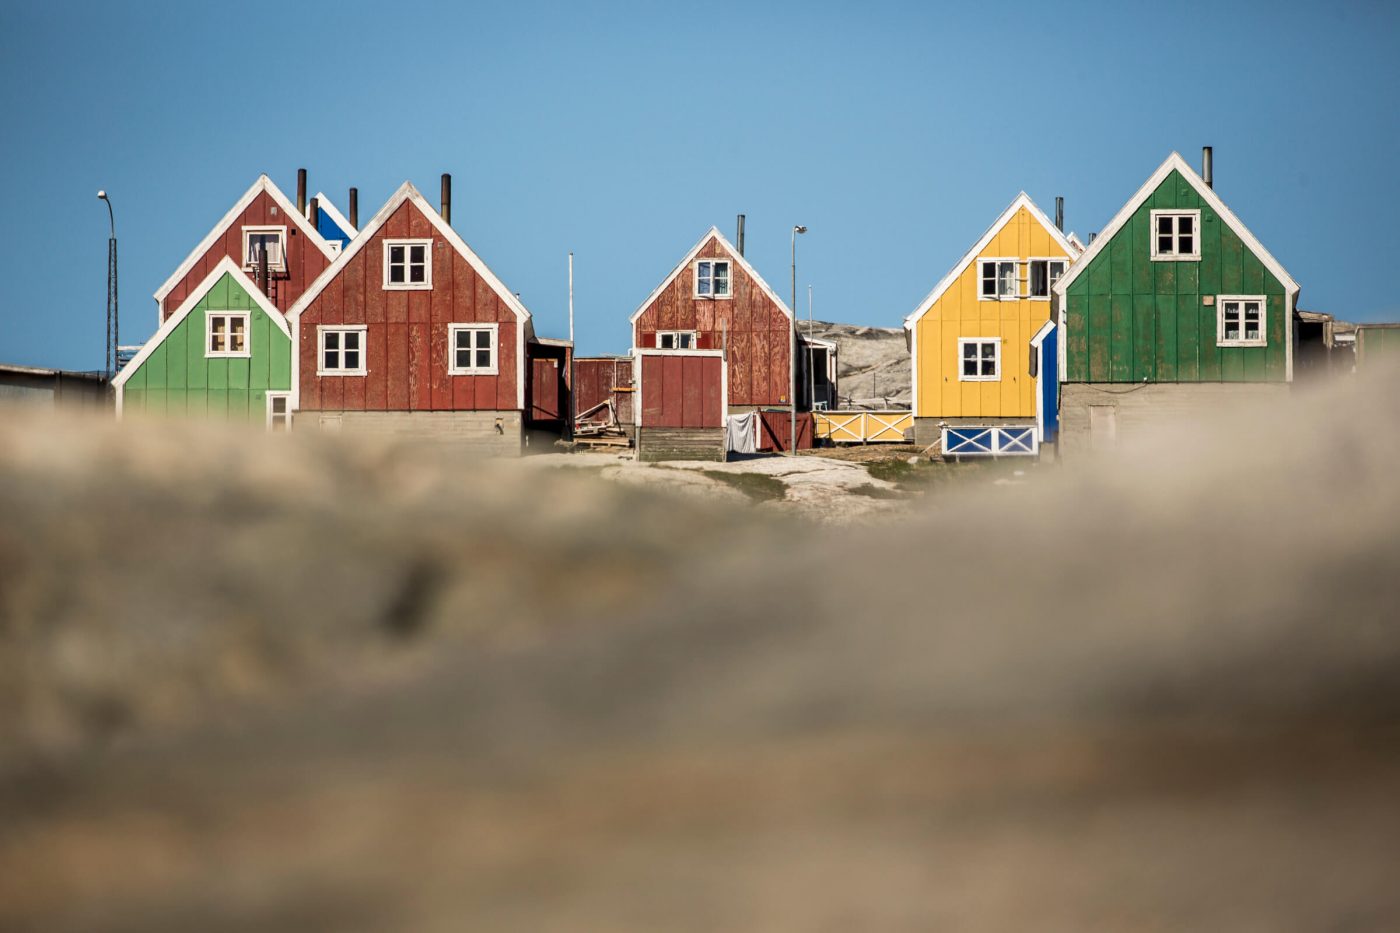 Colourful houses in Qasigiannguit in Greenland. Photo by Mads Pihl - Visit Greenland